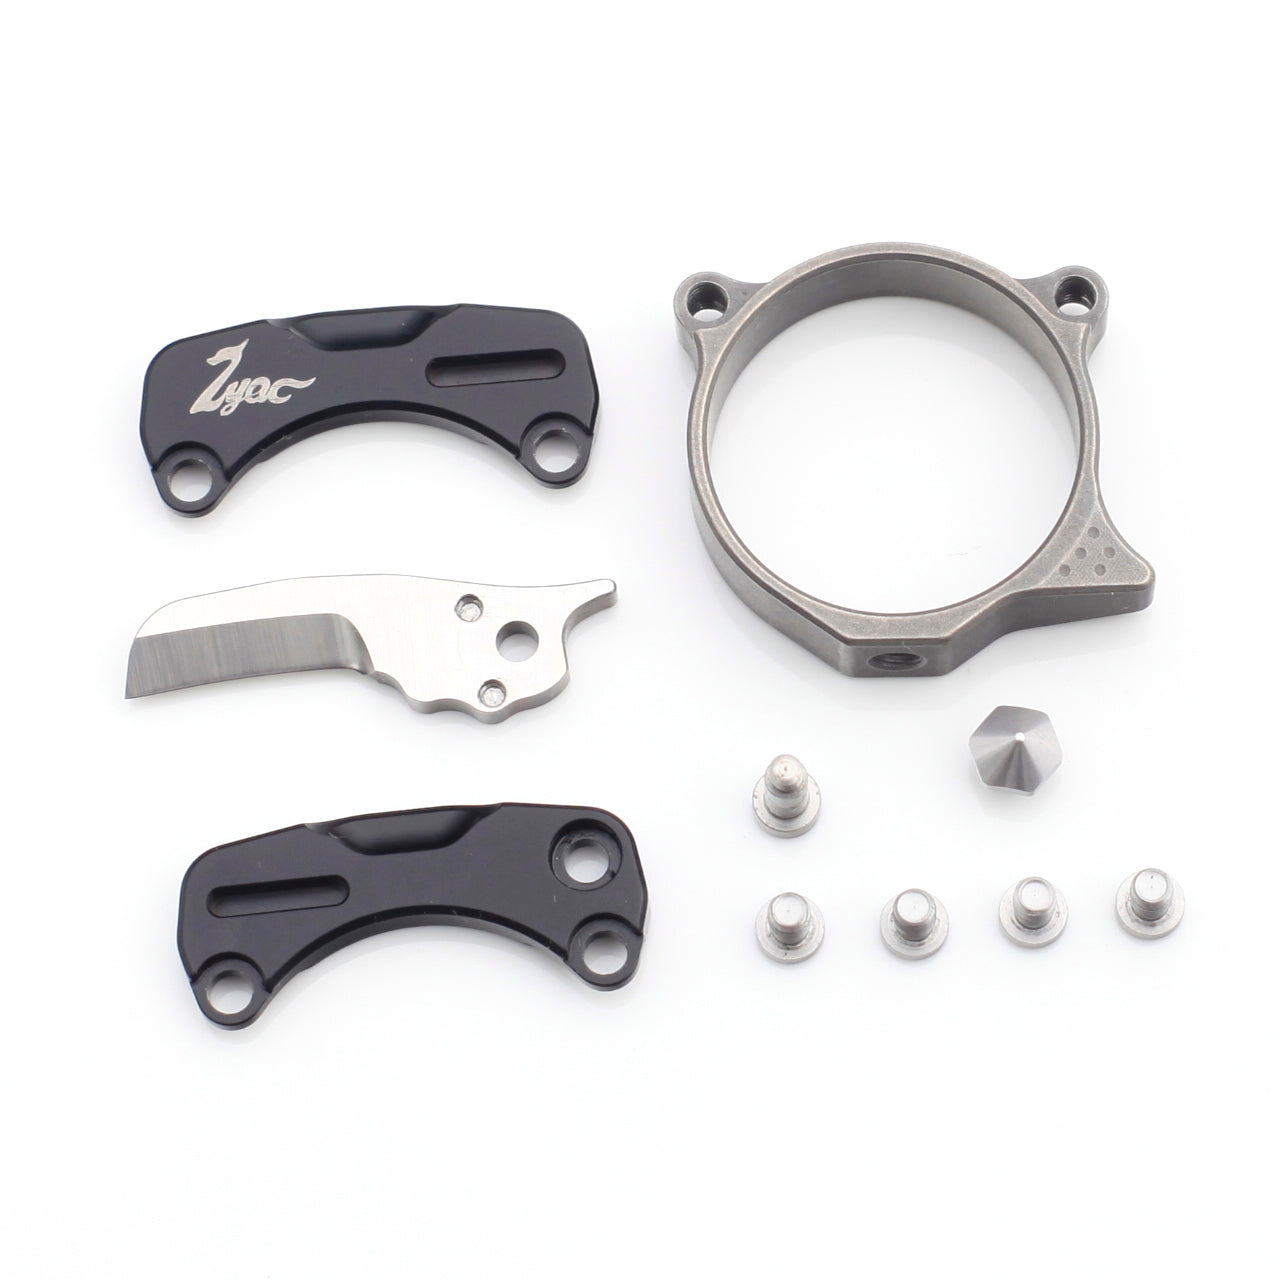 Titanium Knife Ring with M390 Mini Blade Zyac knives